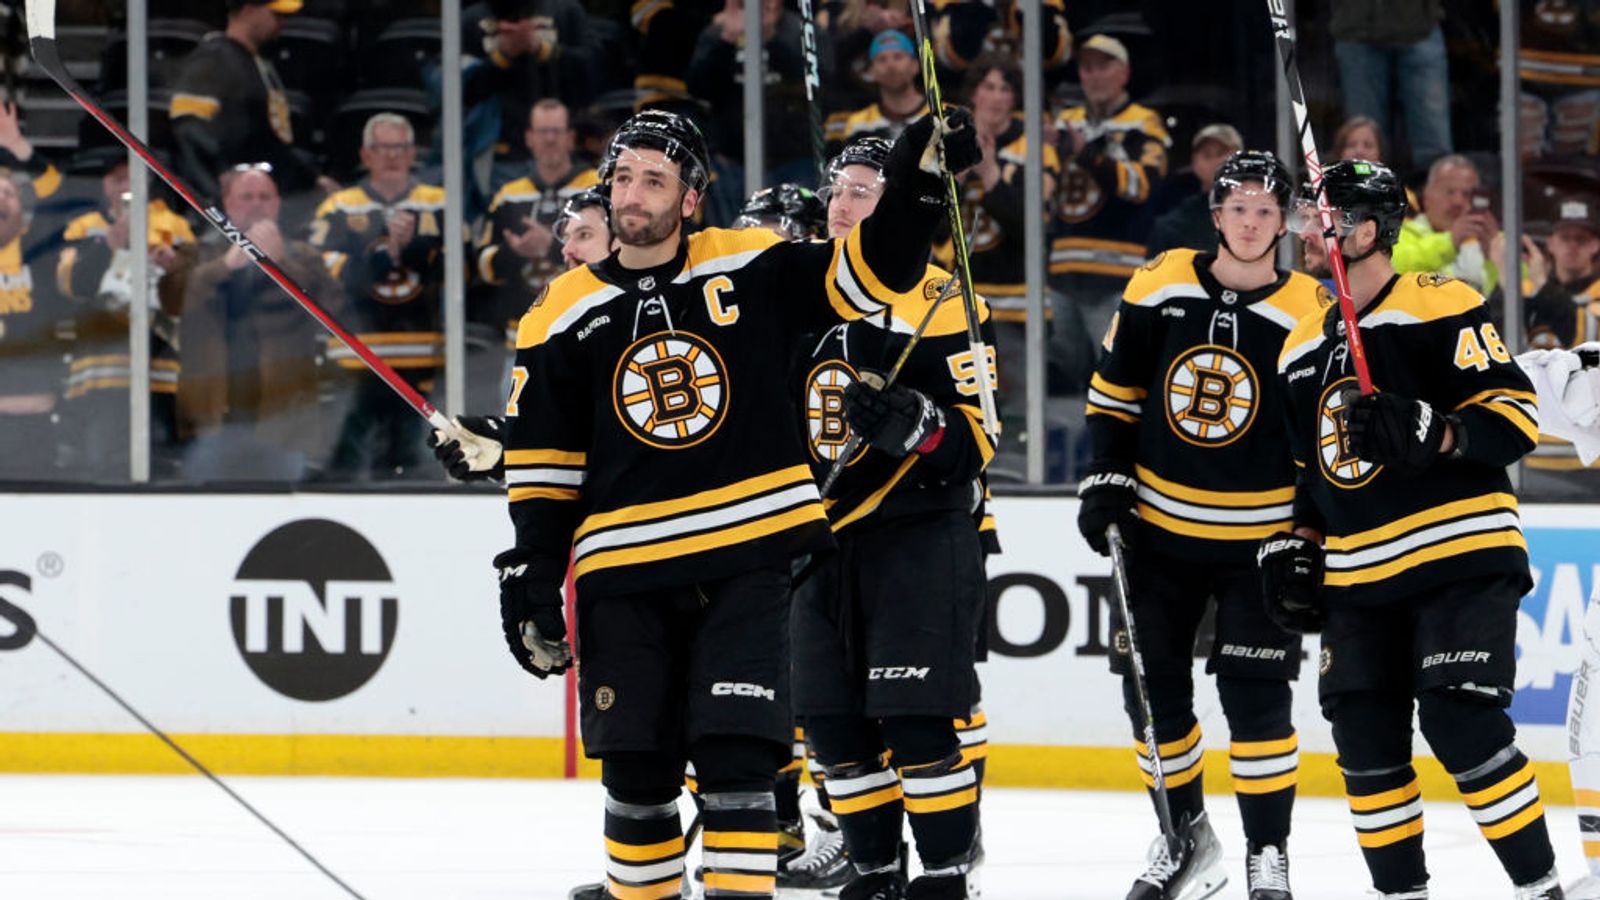 Brad Marchand and Patrice Bergeron share a moment at Charlie